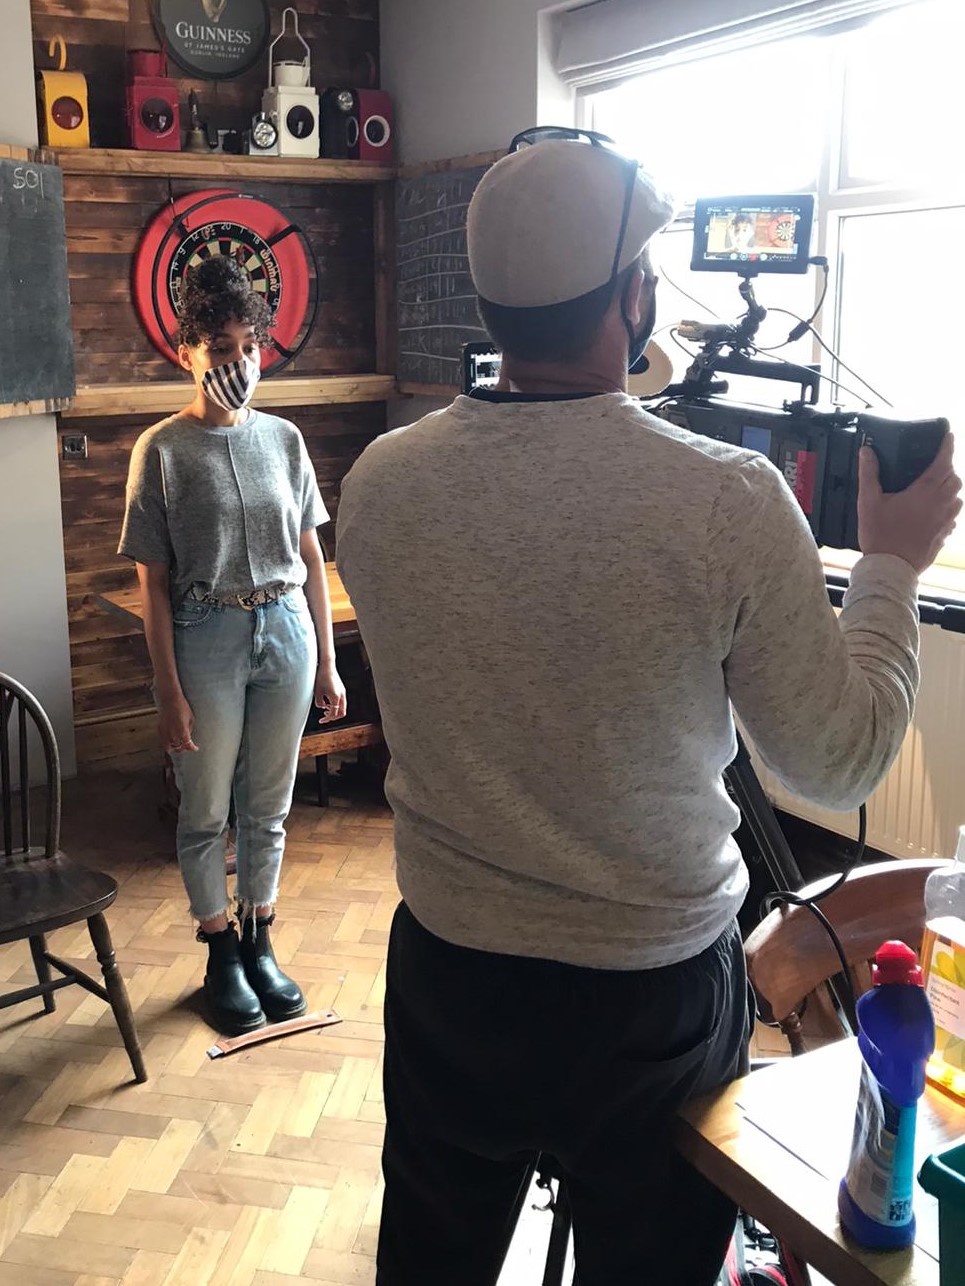 behind the scenes of a short film shoot, featuring a person posing by a dartboard in a pub for someone filming.